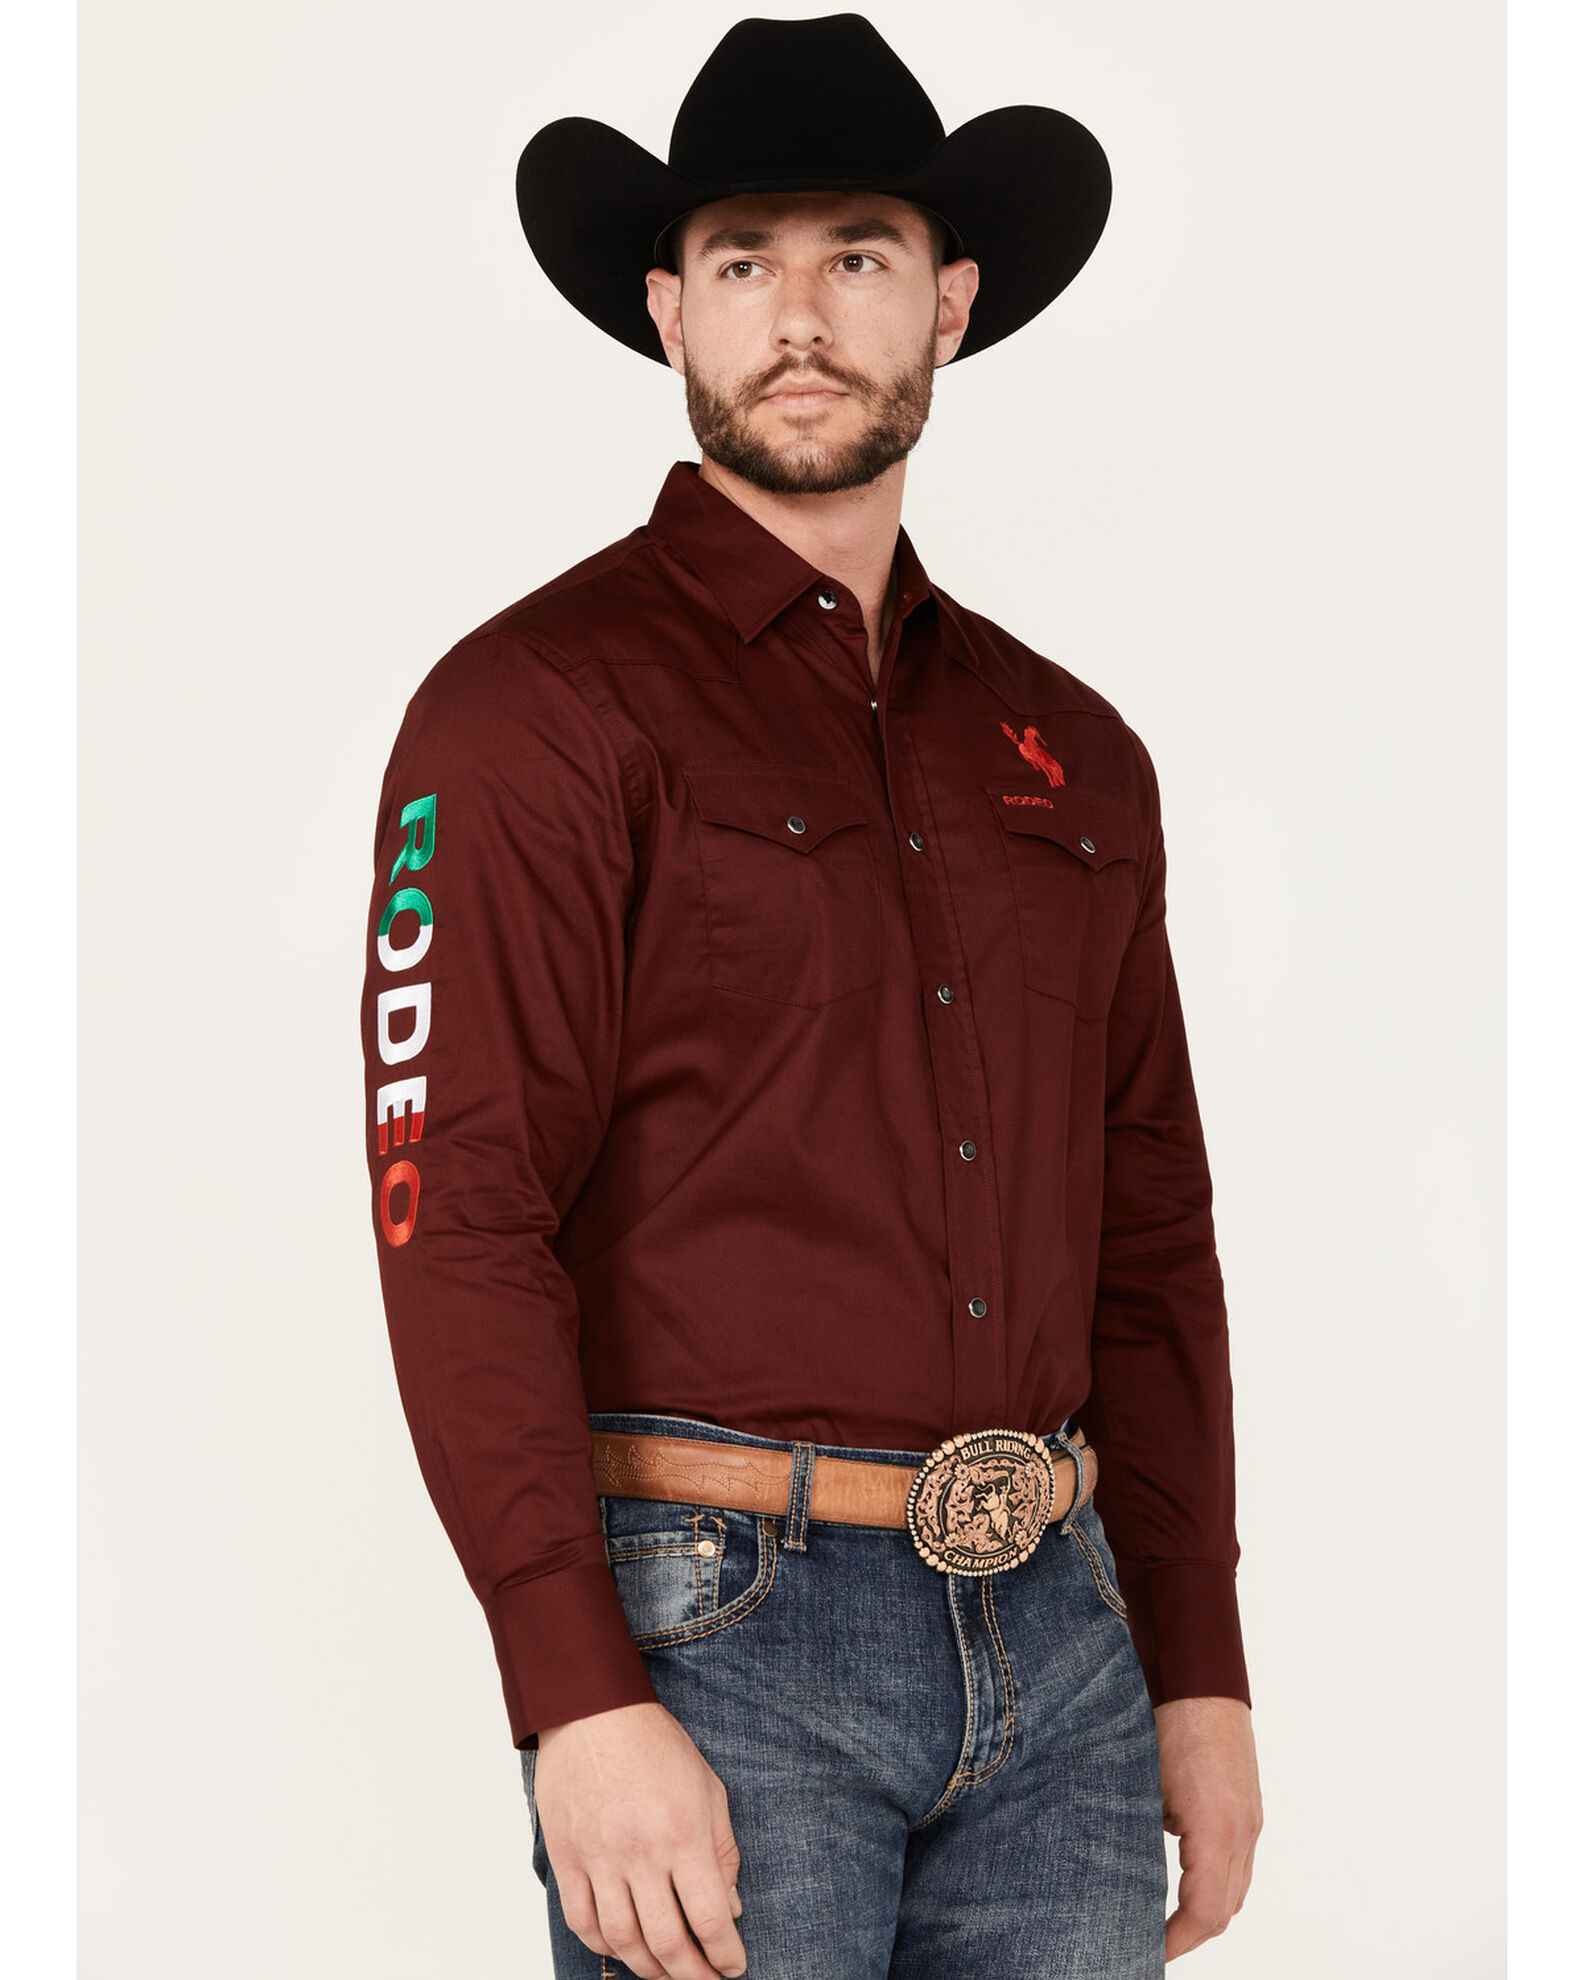 Rodeo Clothing Men's Mexico Bronco Long Sleeve Snap Western Shirt